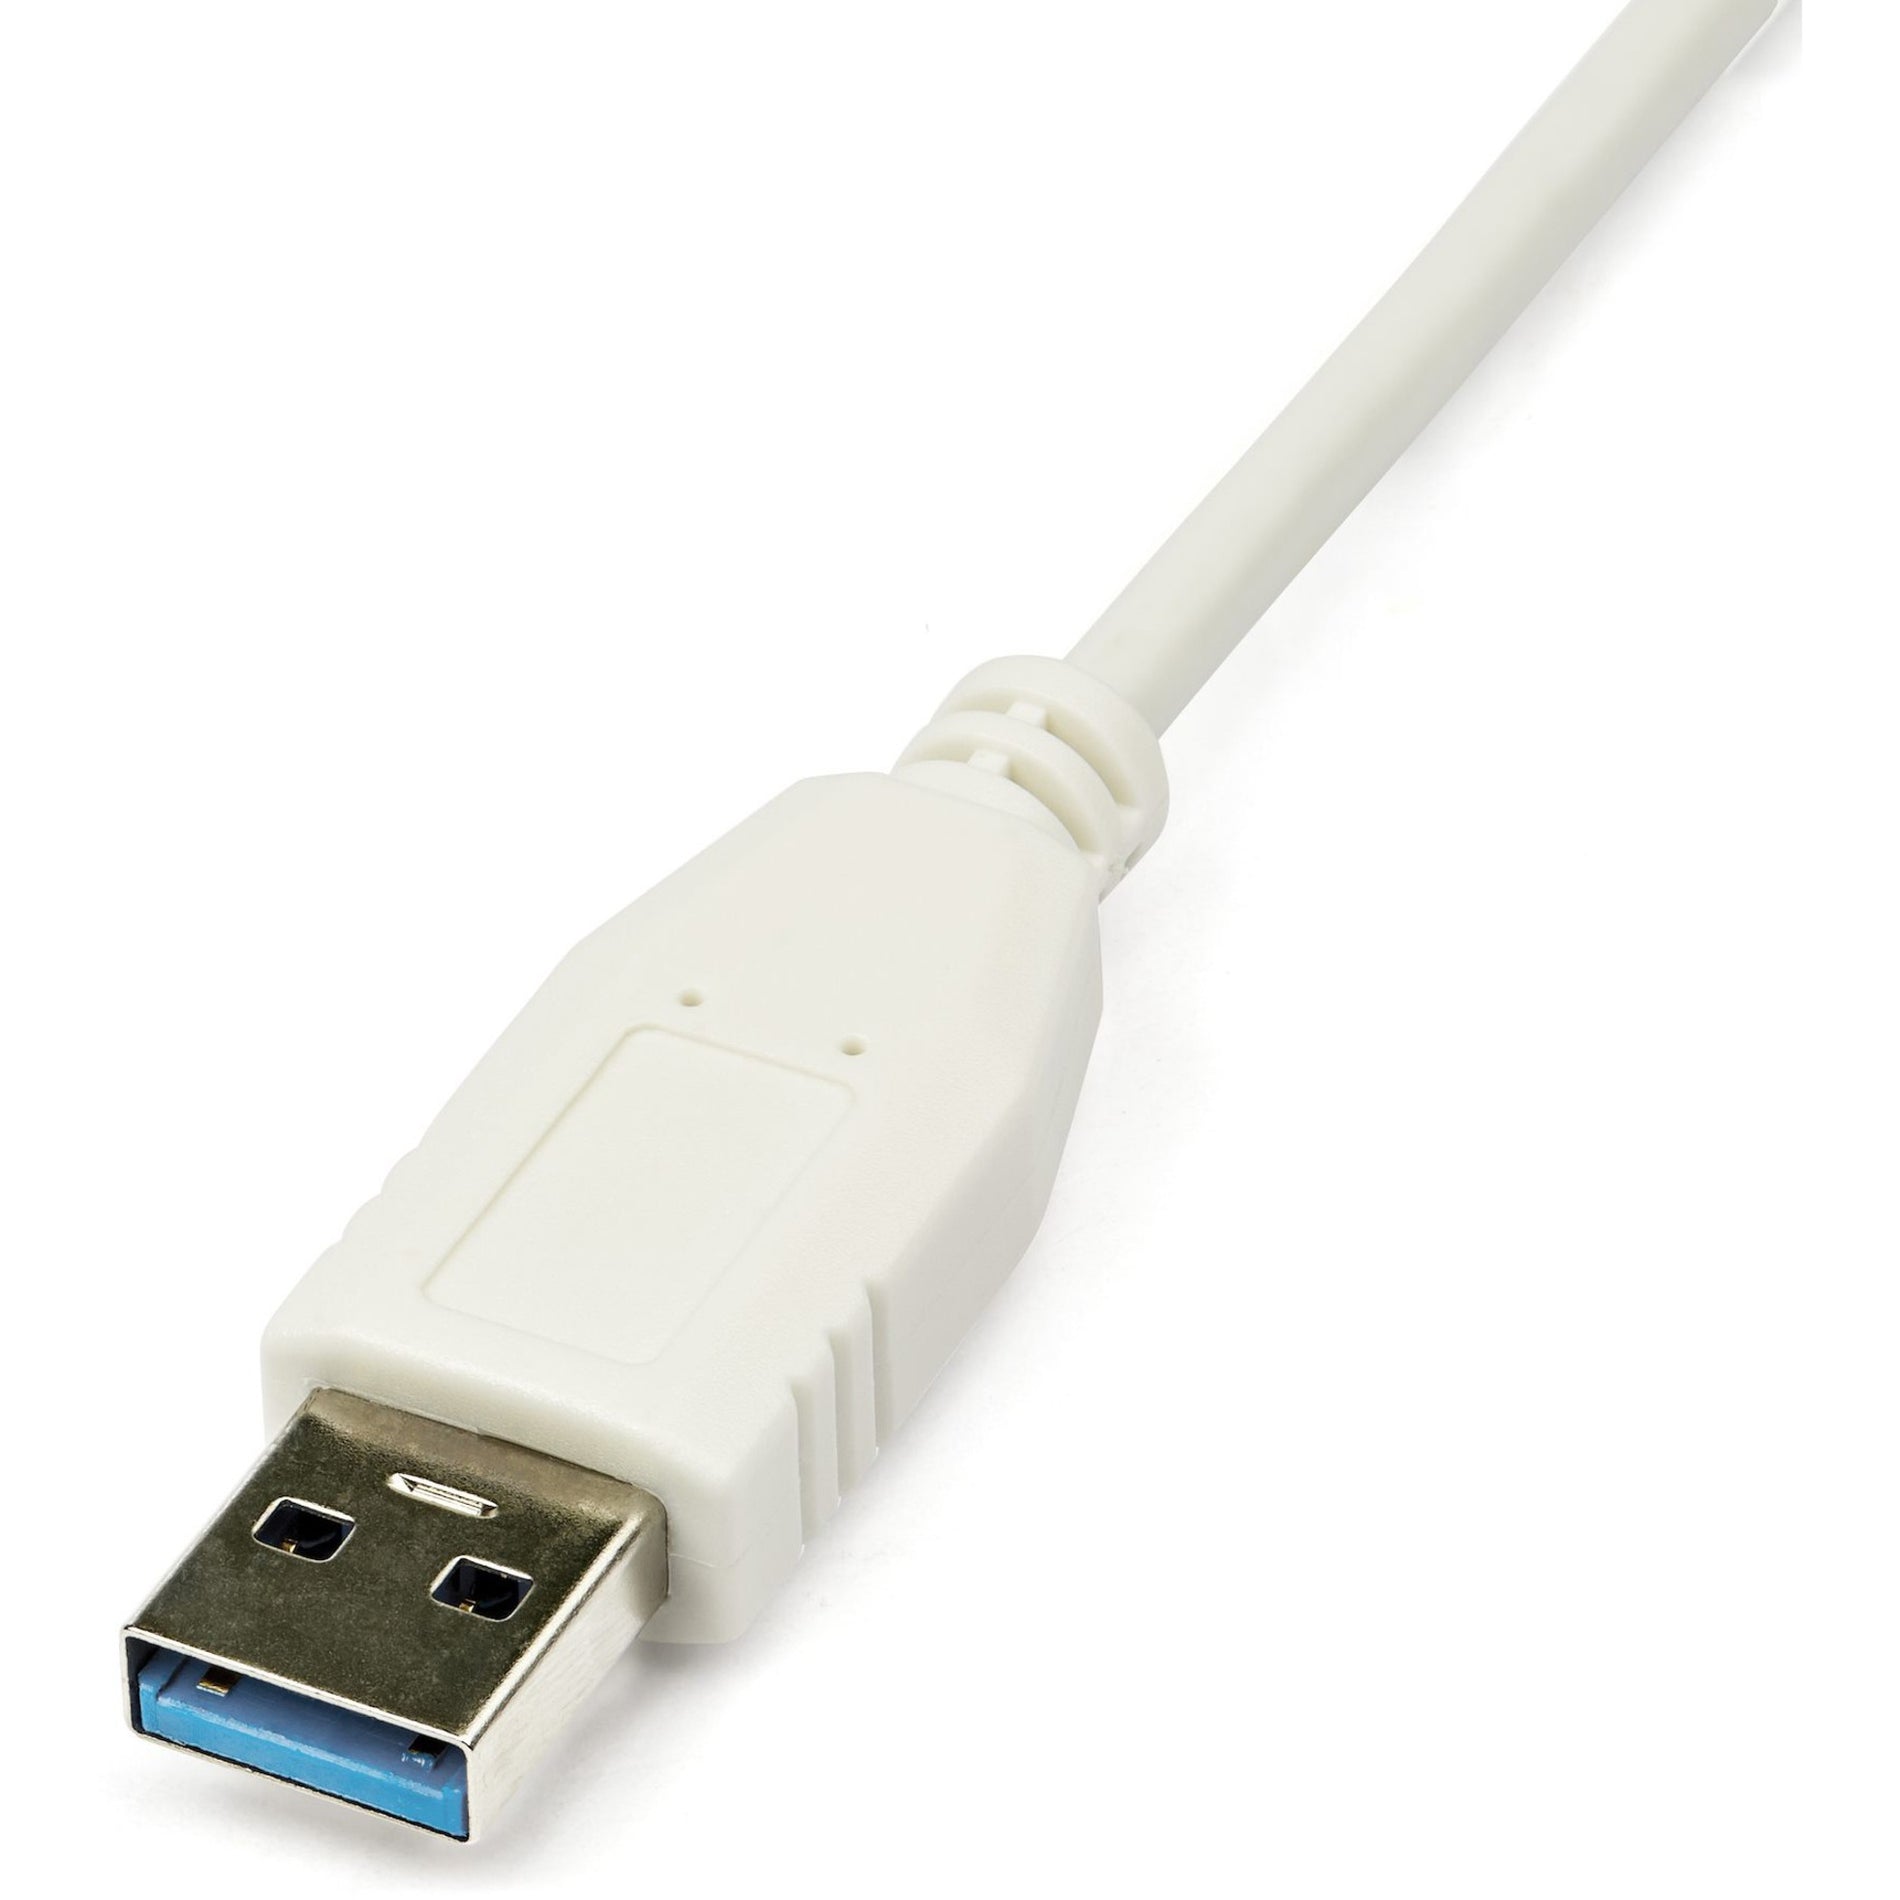 StarTech.com USB31000SW USB 3.0 to Gigabit Ethernet NIC Network Adapter - White, TAA Compliant, PC Compatible